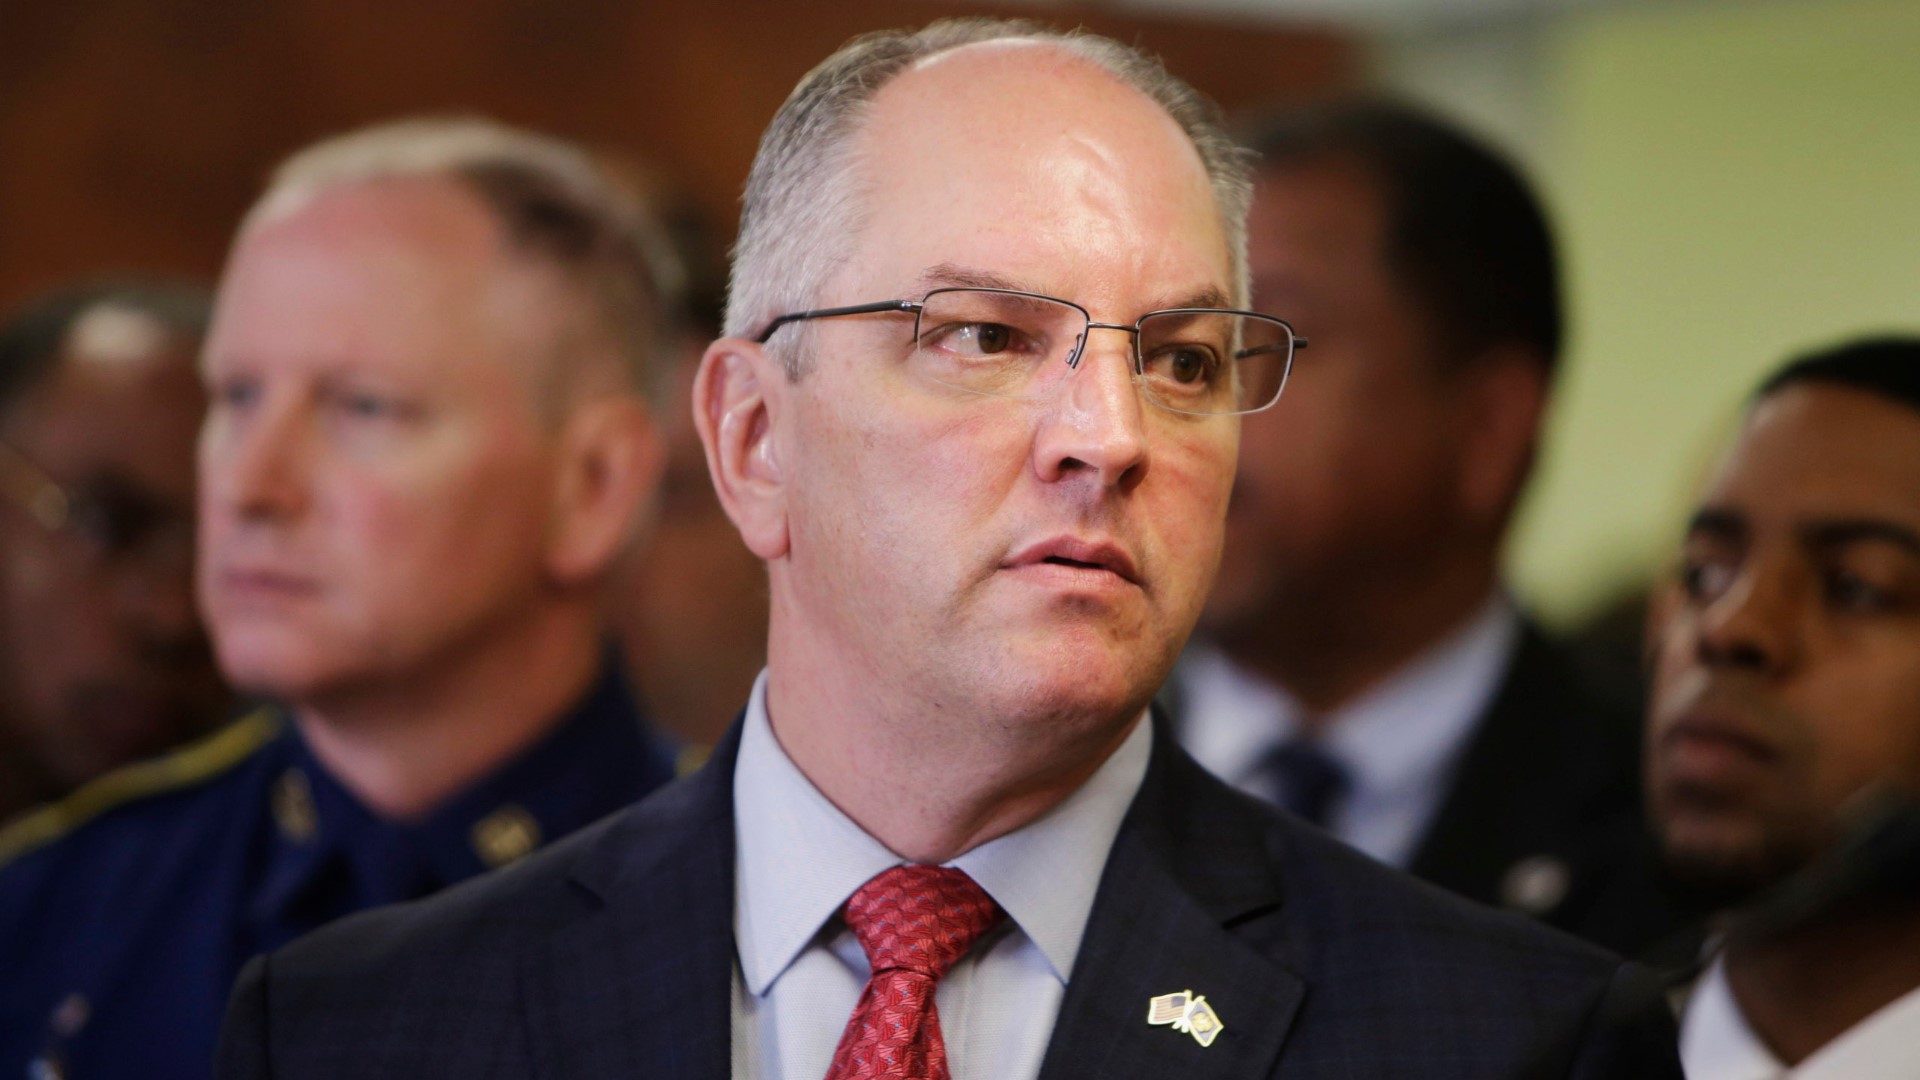 Louisiana Governor John Bel Edwards has called for a news conference Wednesday morning to discuss the state's preparations for a possible tropical storm later this week.